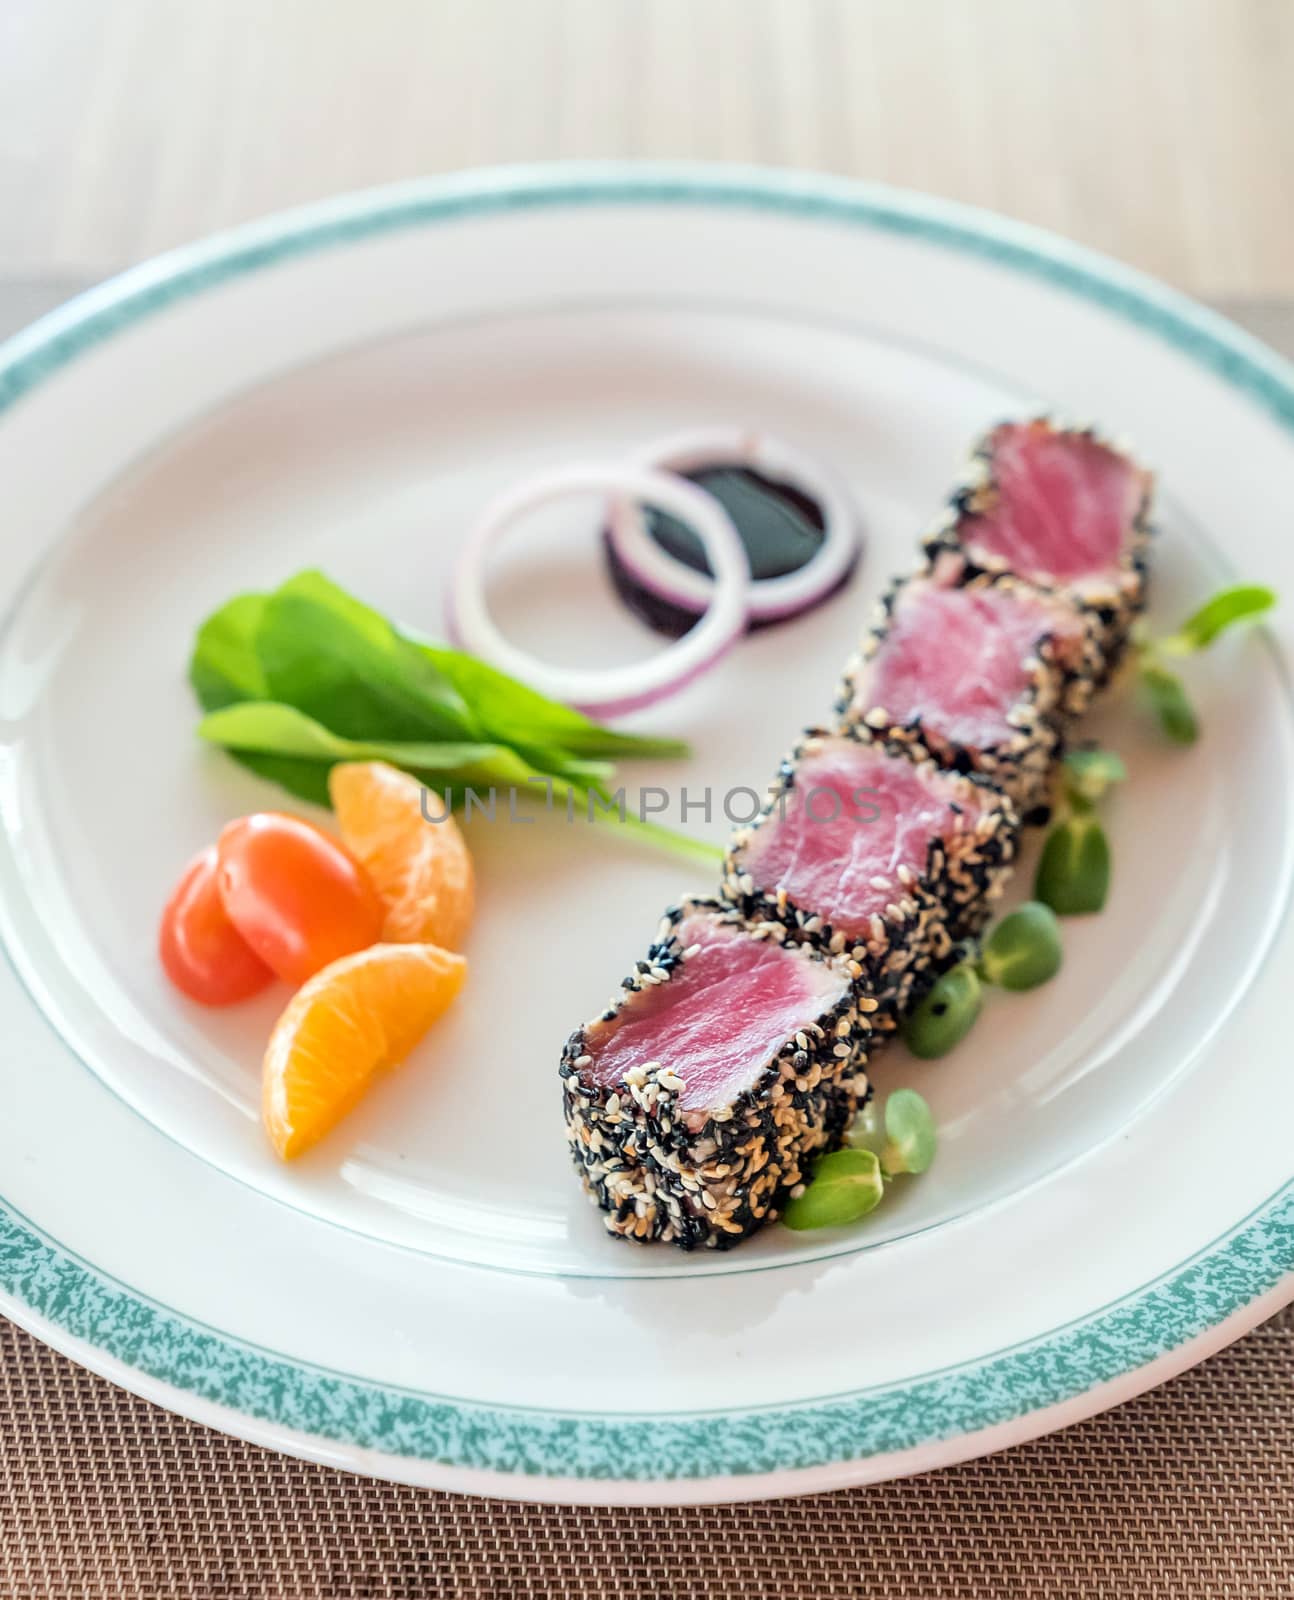 Seared tuna with sesame seeds with green salad on white plate